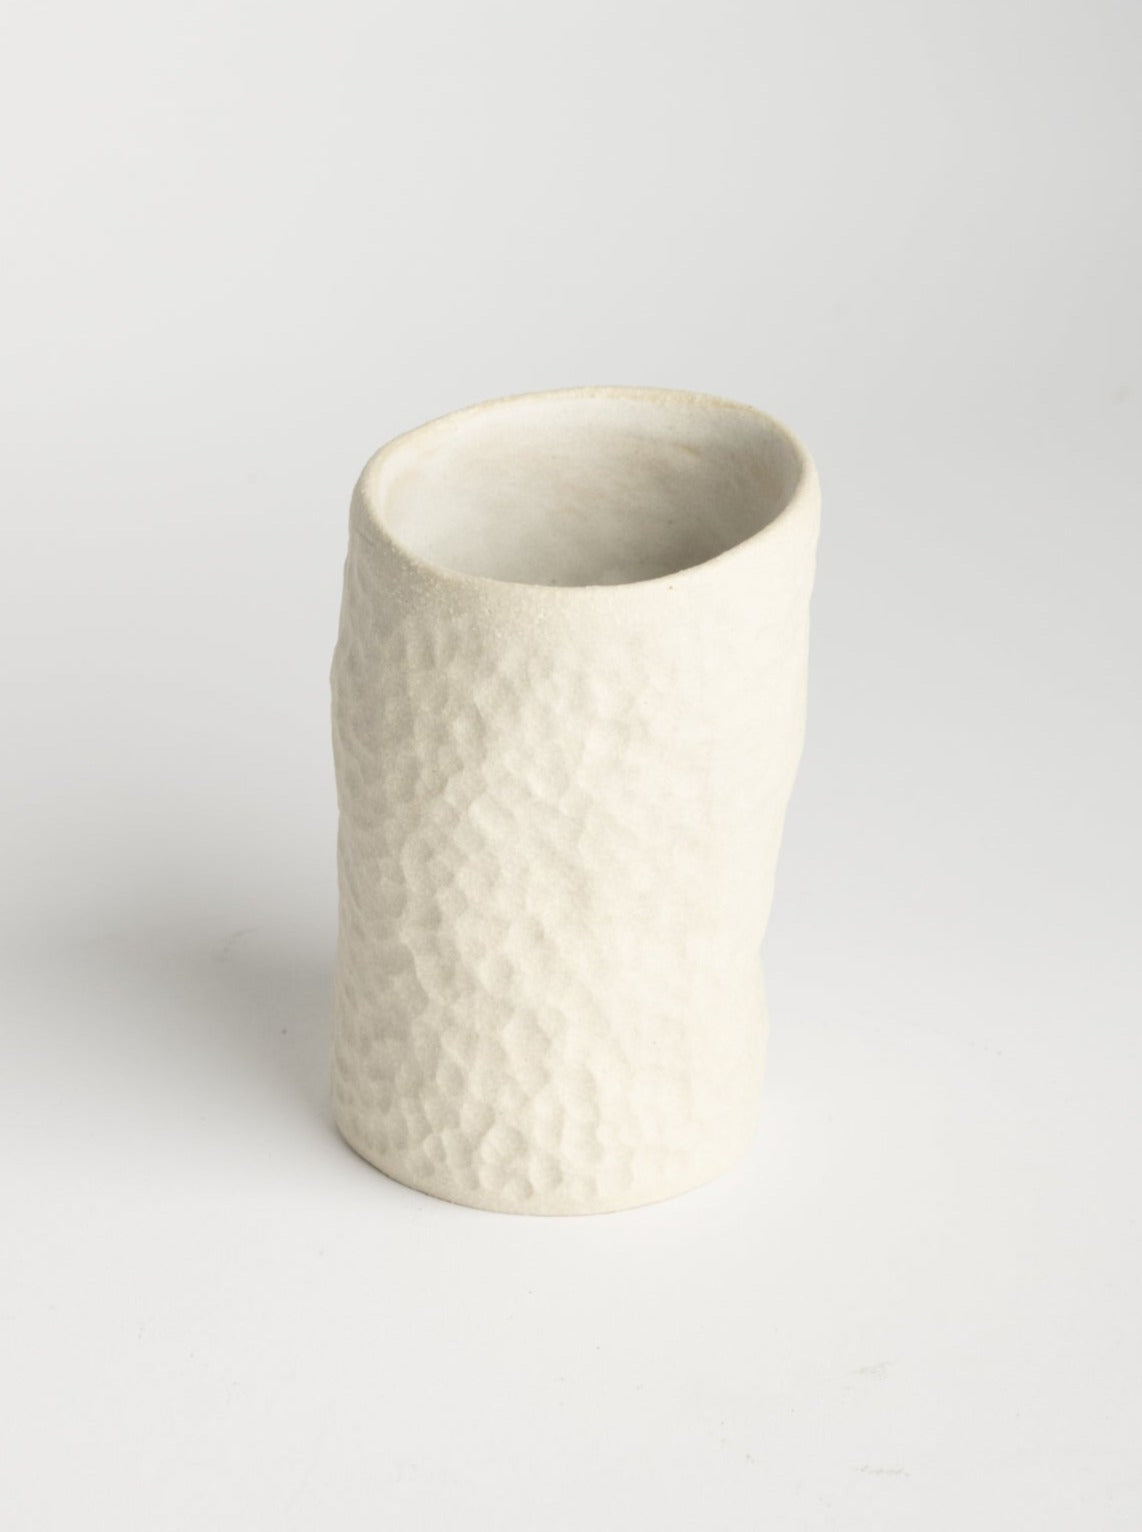 Organic-shape Textured Cup